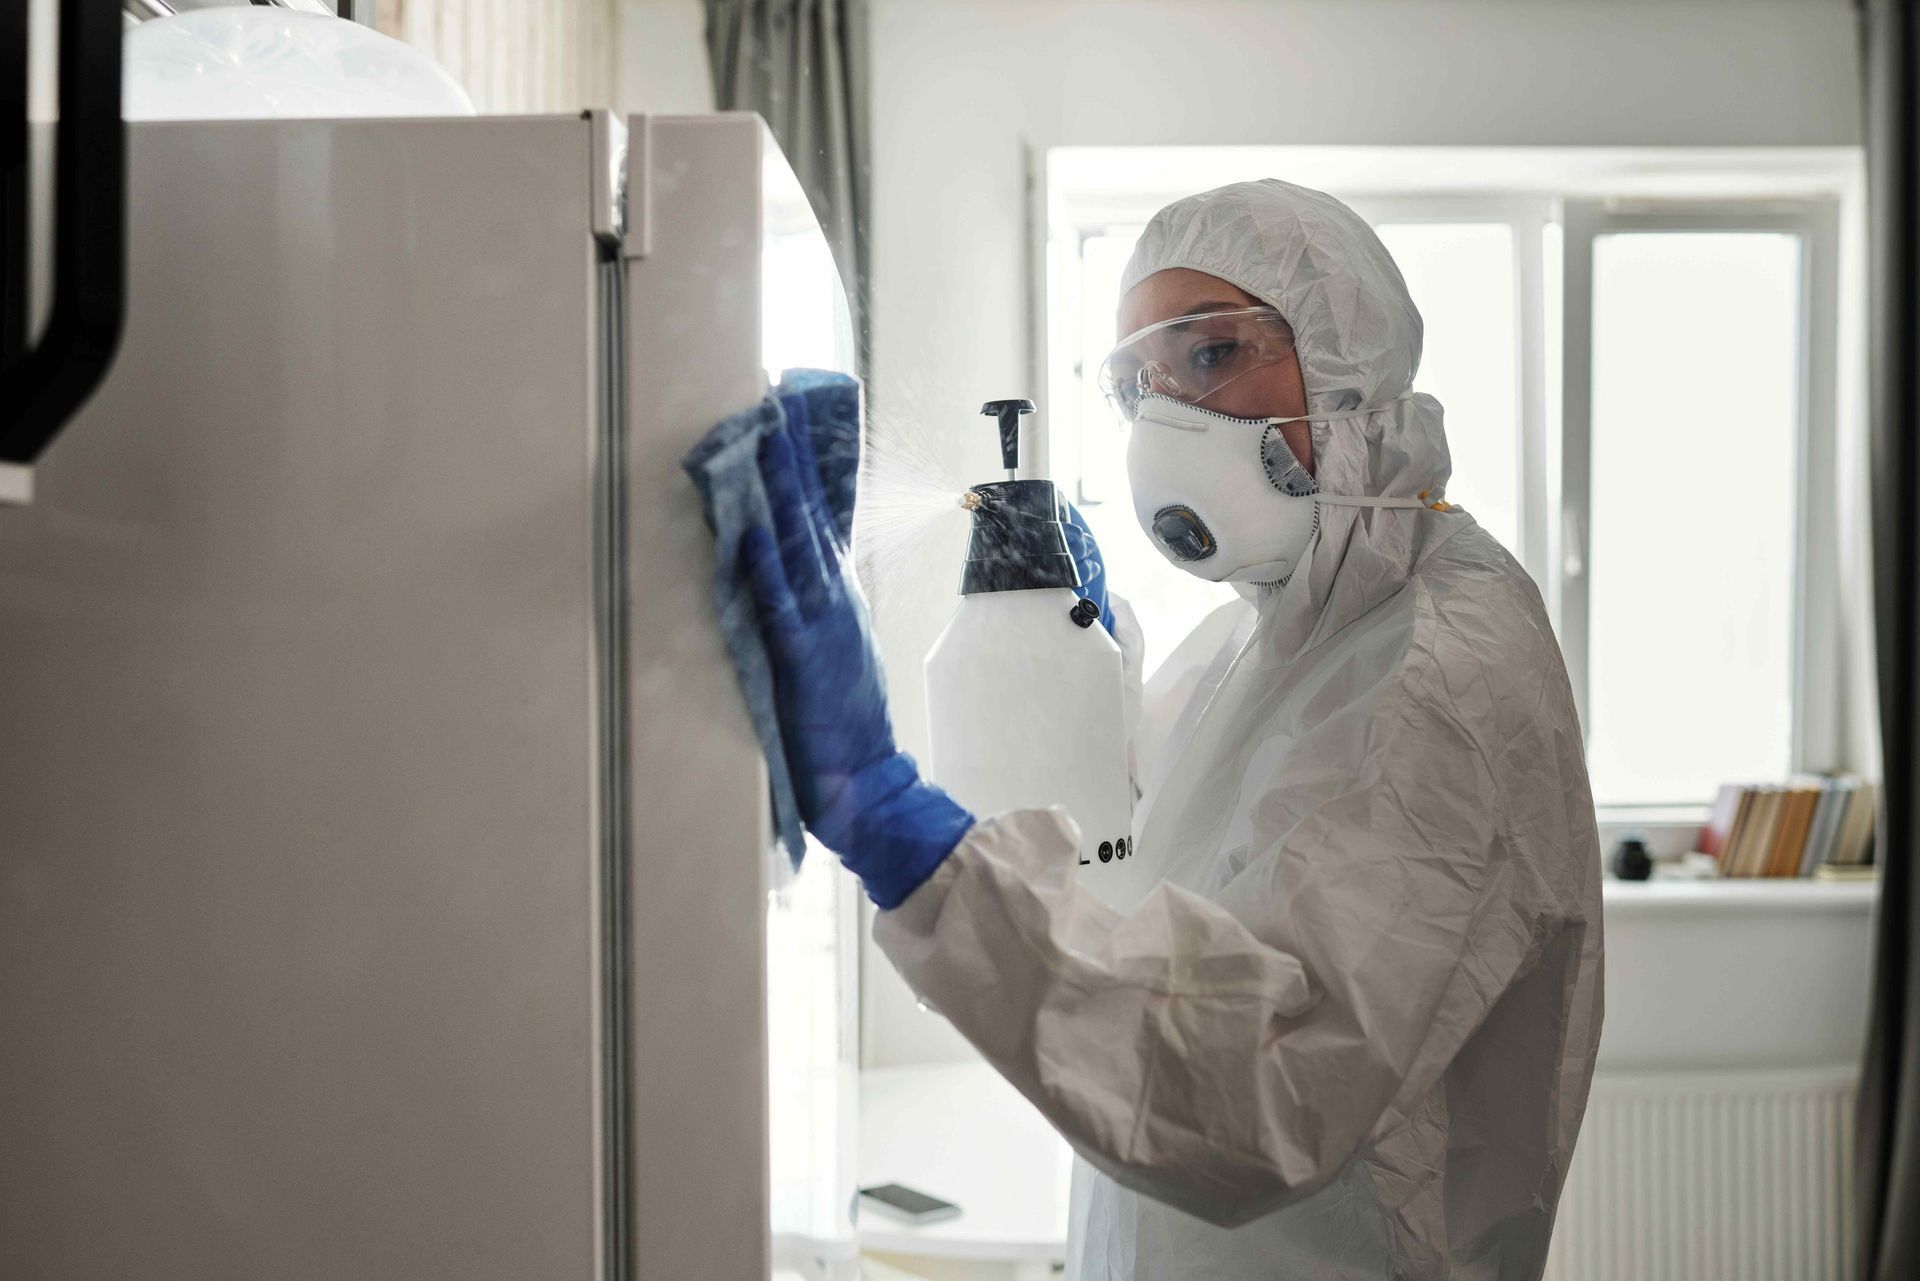 a man in a protective suit is cleaning a refrigerator